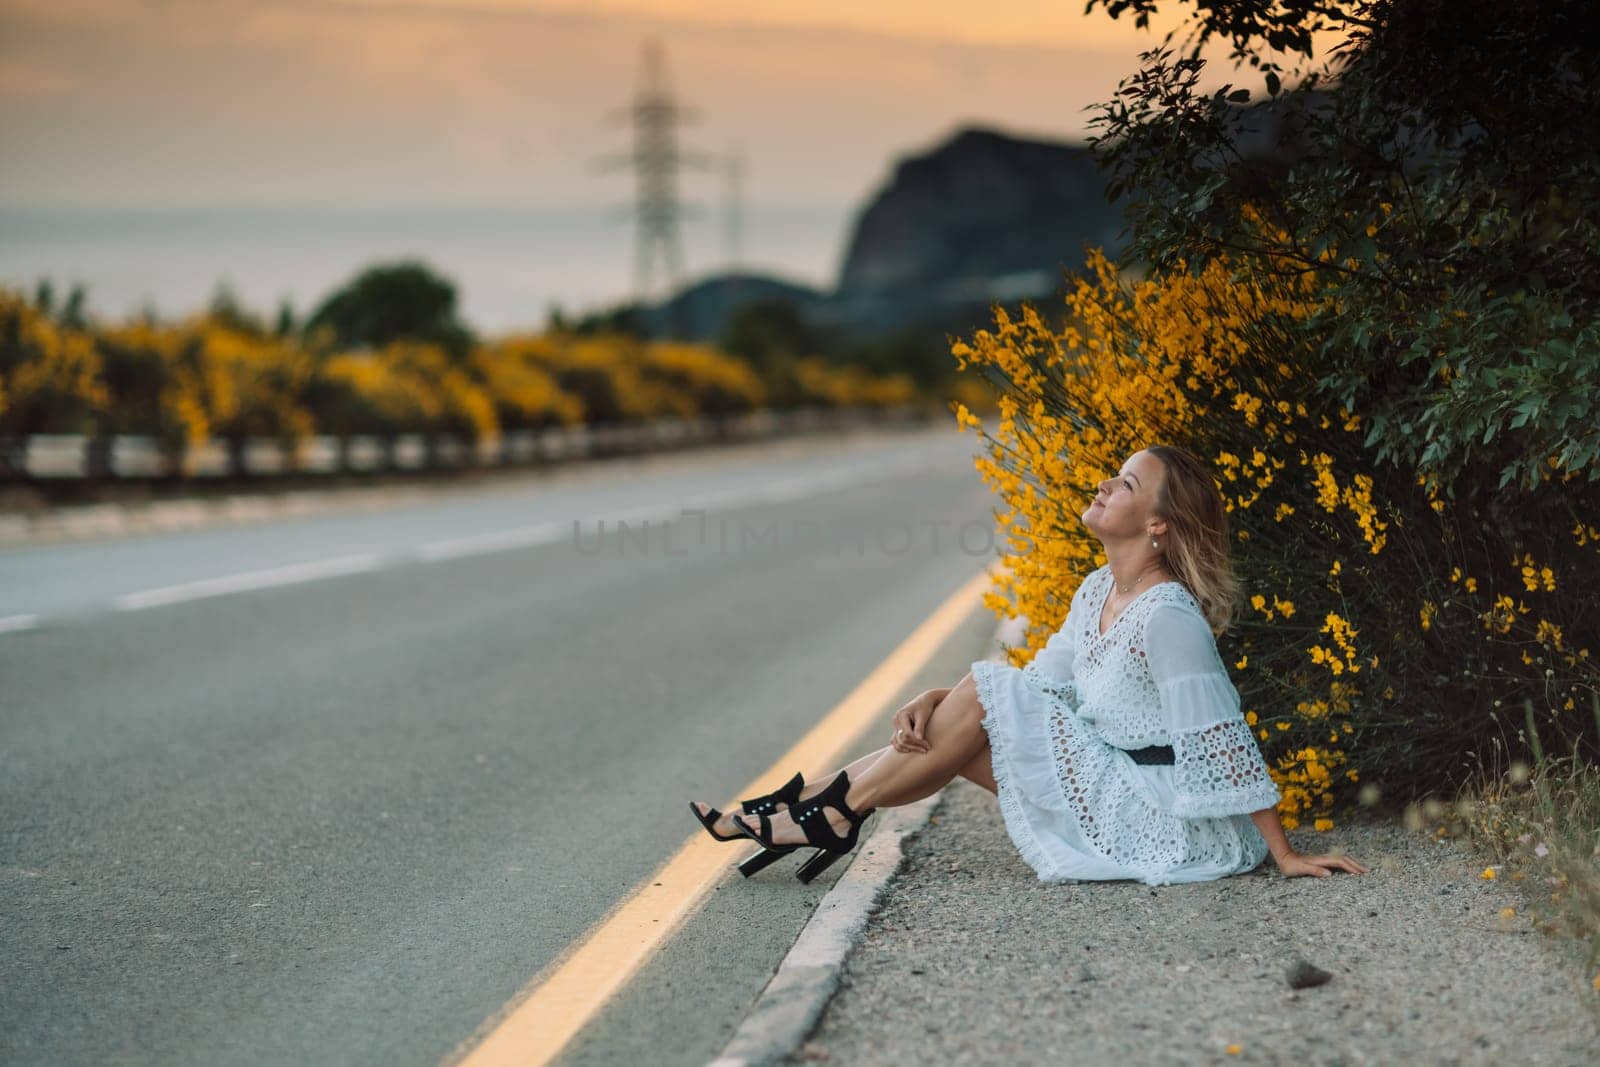 A woman is sitting on the side of a road, wearing a white dress and black shoes by Matiunina